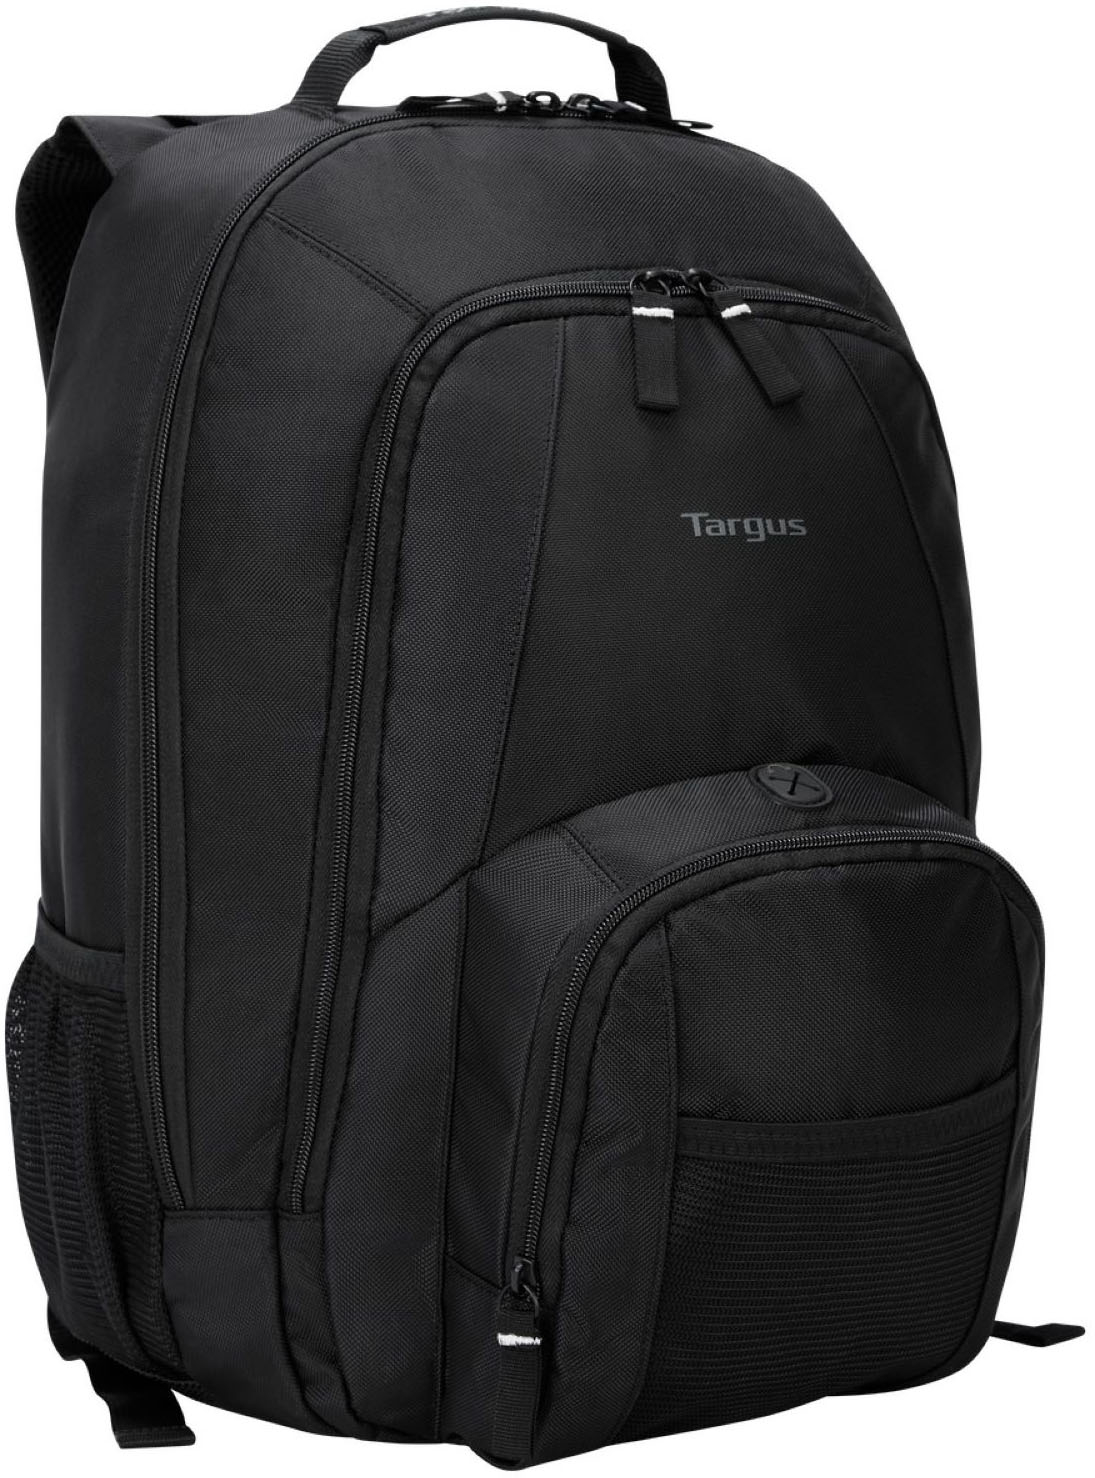 Angle View: Targus - 16" Groove Backpack - Black